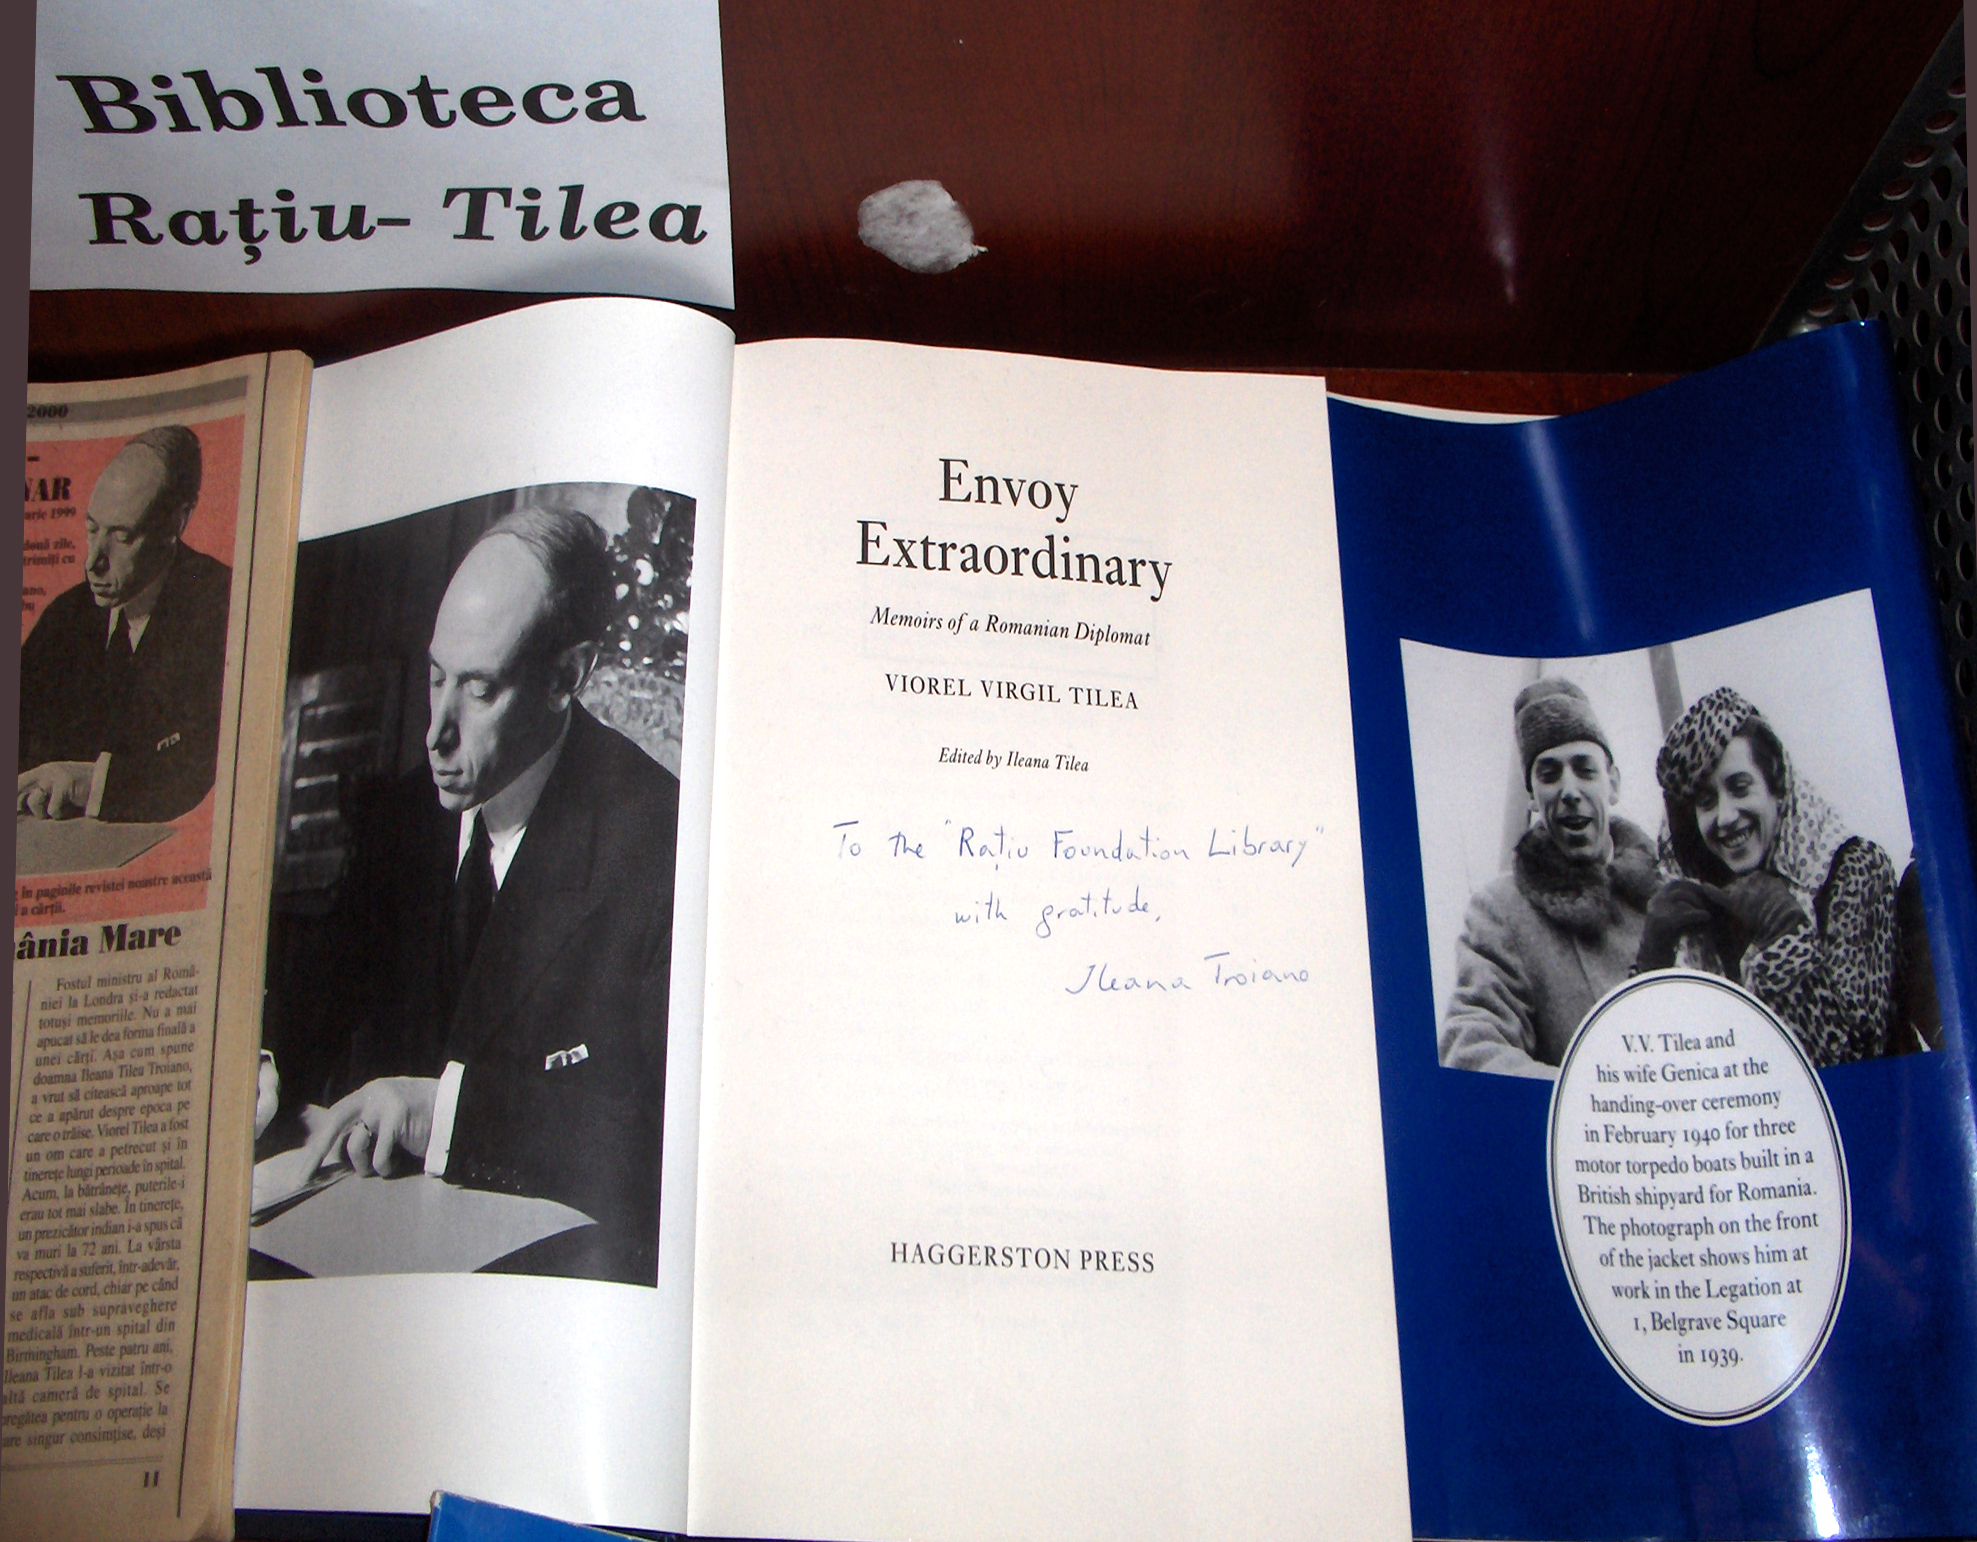 Publications displayed during the festive opening of the Raţiu–Tilea Reading Room at BCU Cluj-Napoca, 5 June 2009